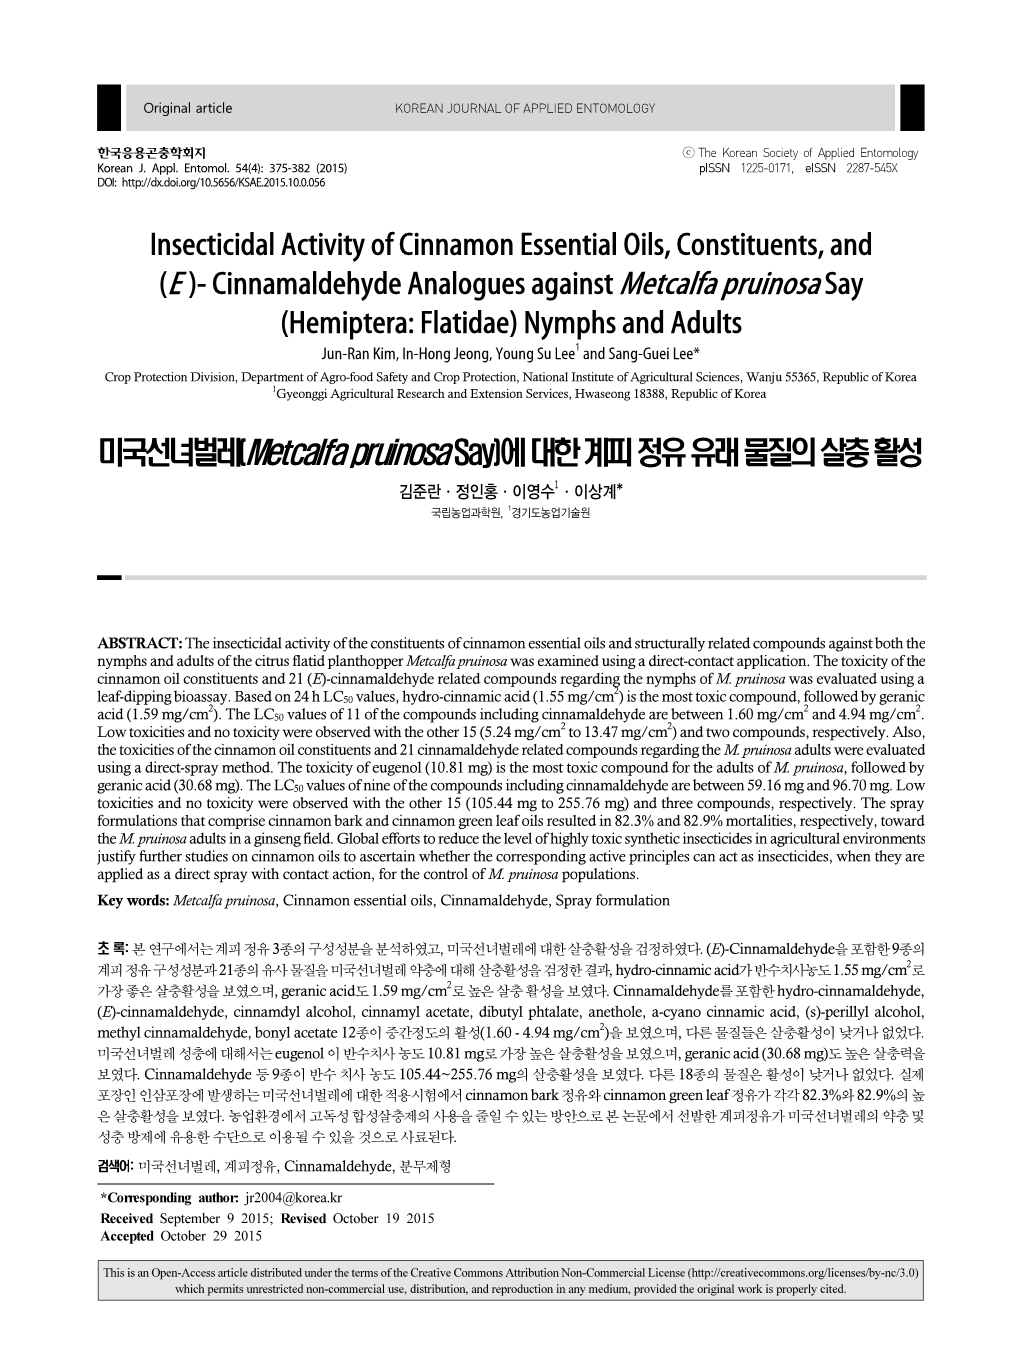 Insecticidal Activity of Cinnamon Essential Oils, Constituents, and (E )